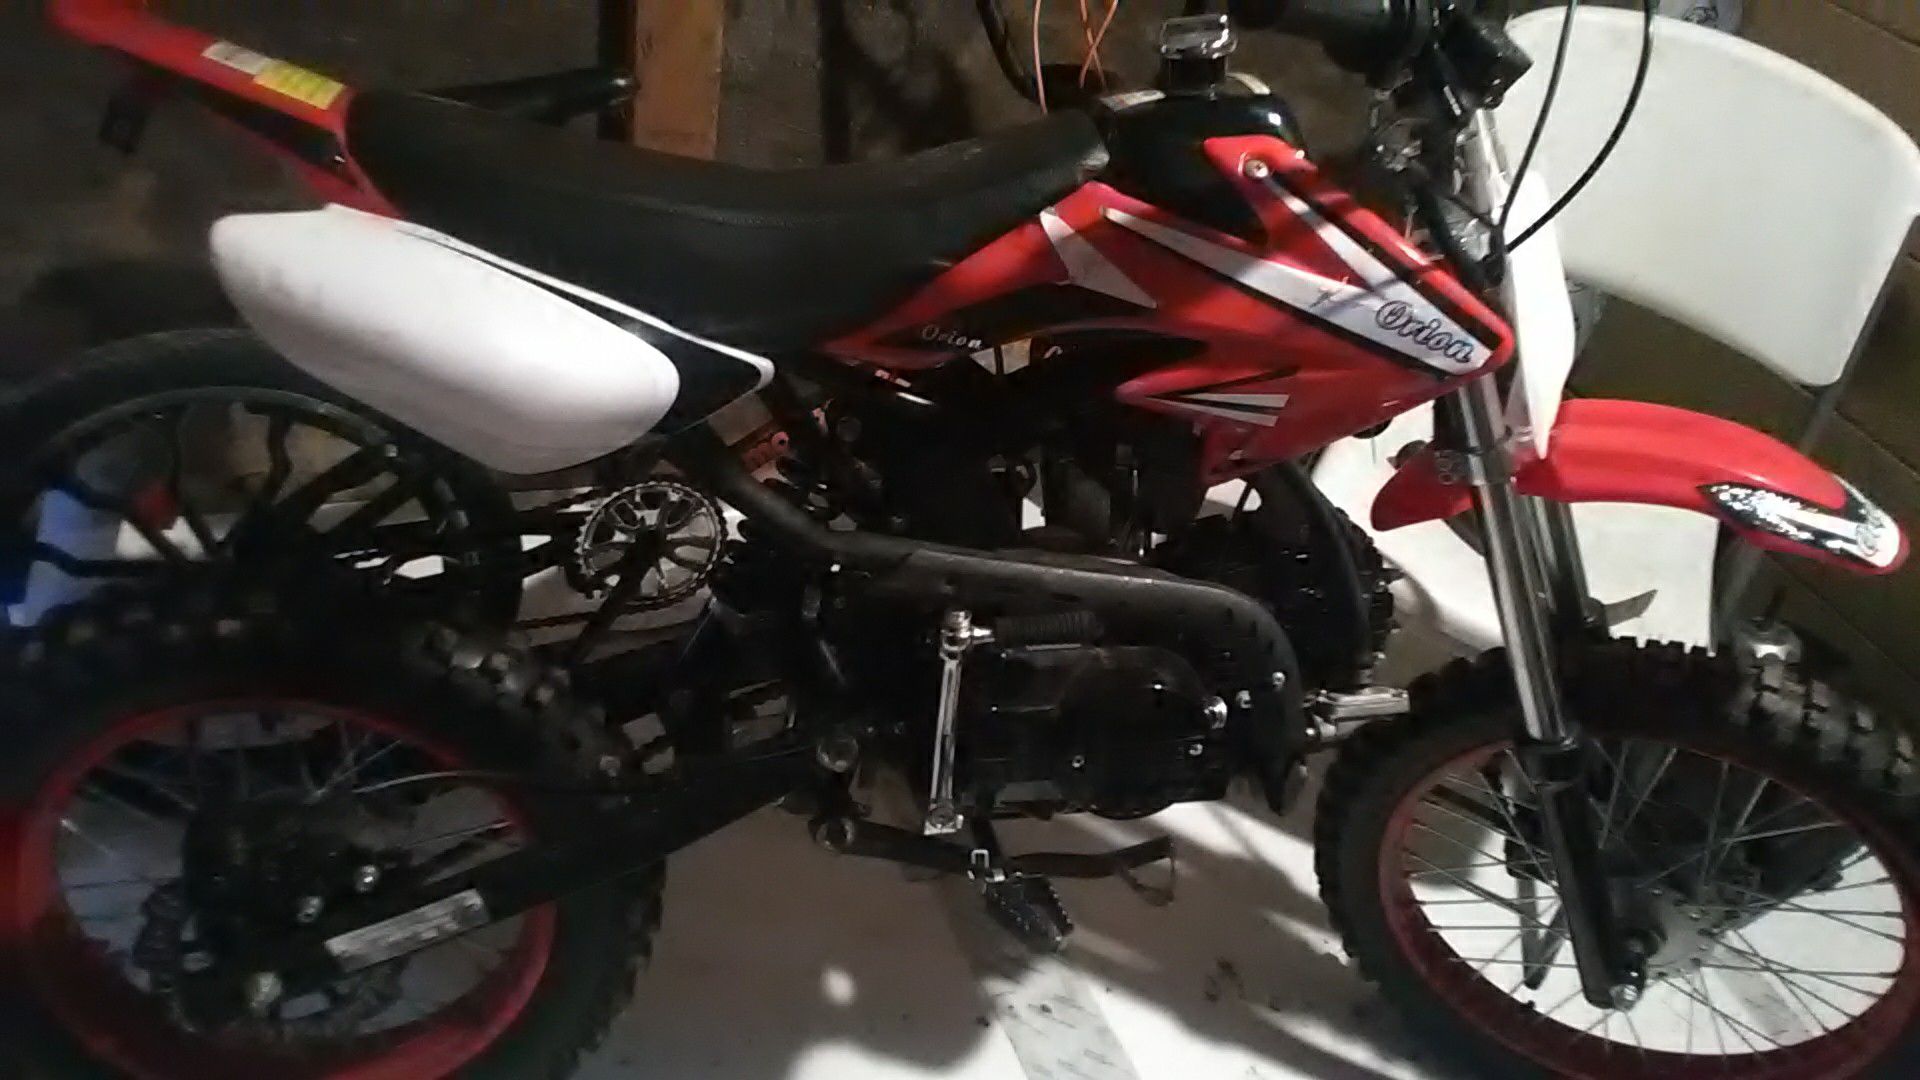 2018 Orion 125cc pitbike